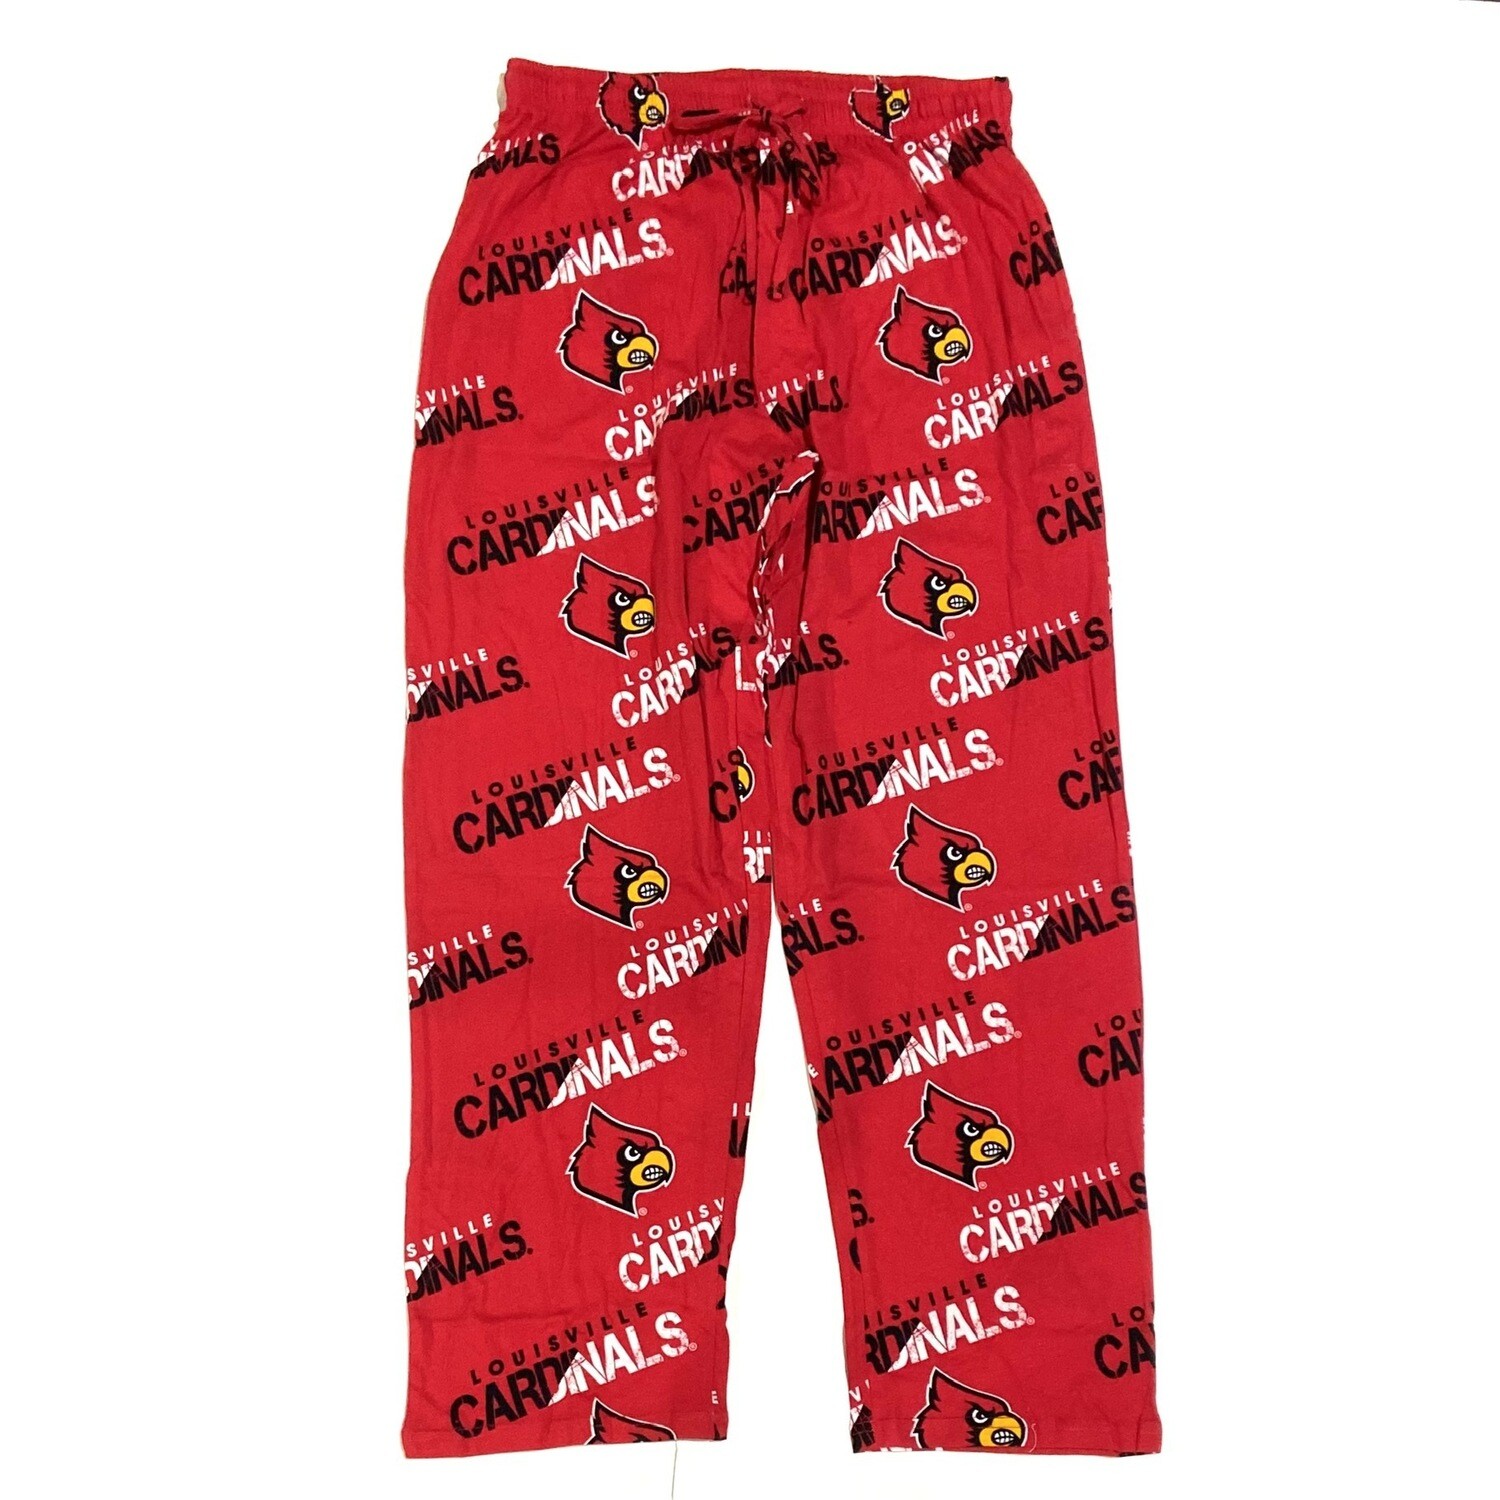 Officially Licensed NFL Men's Knit Pant by Concept Sports - Chiefs